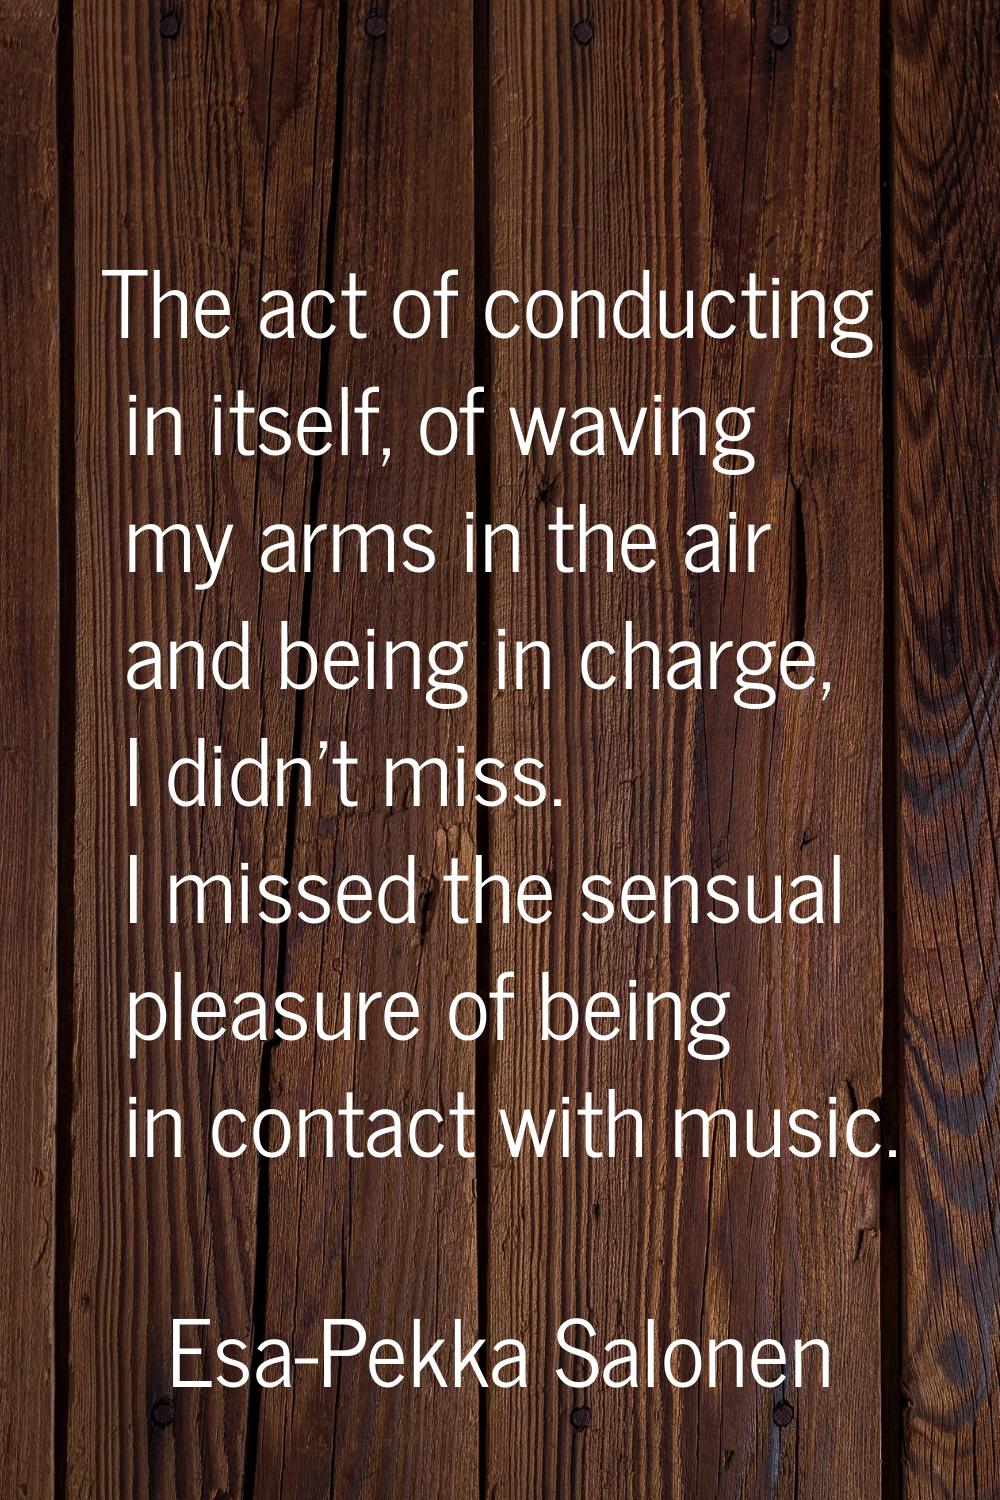 The act of conducting in itself, of waving my arms in the air and being in charge, I didn't miss. I